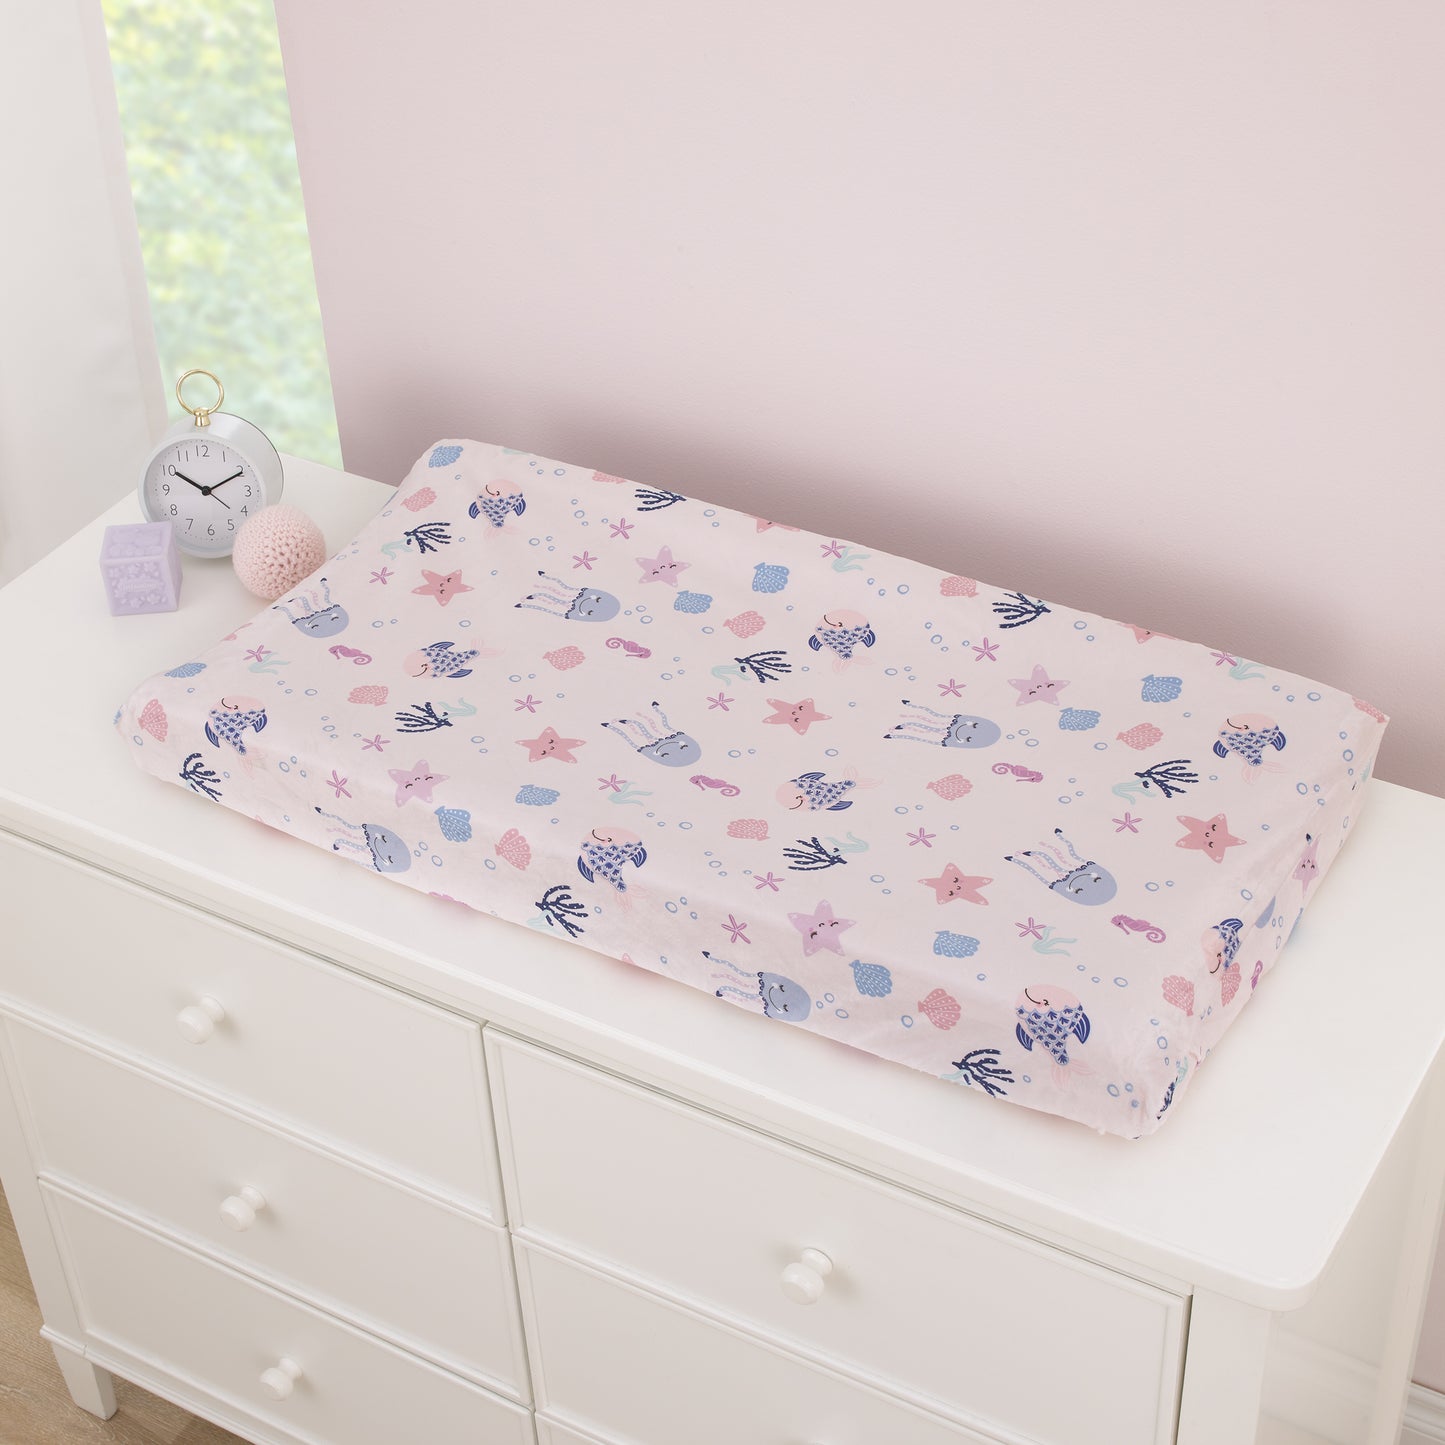 NoJo Mermaid Lagoon Pink, and Blue Sea Friends Super Soft Contoured Changing Pad Cover